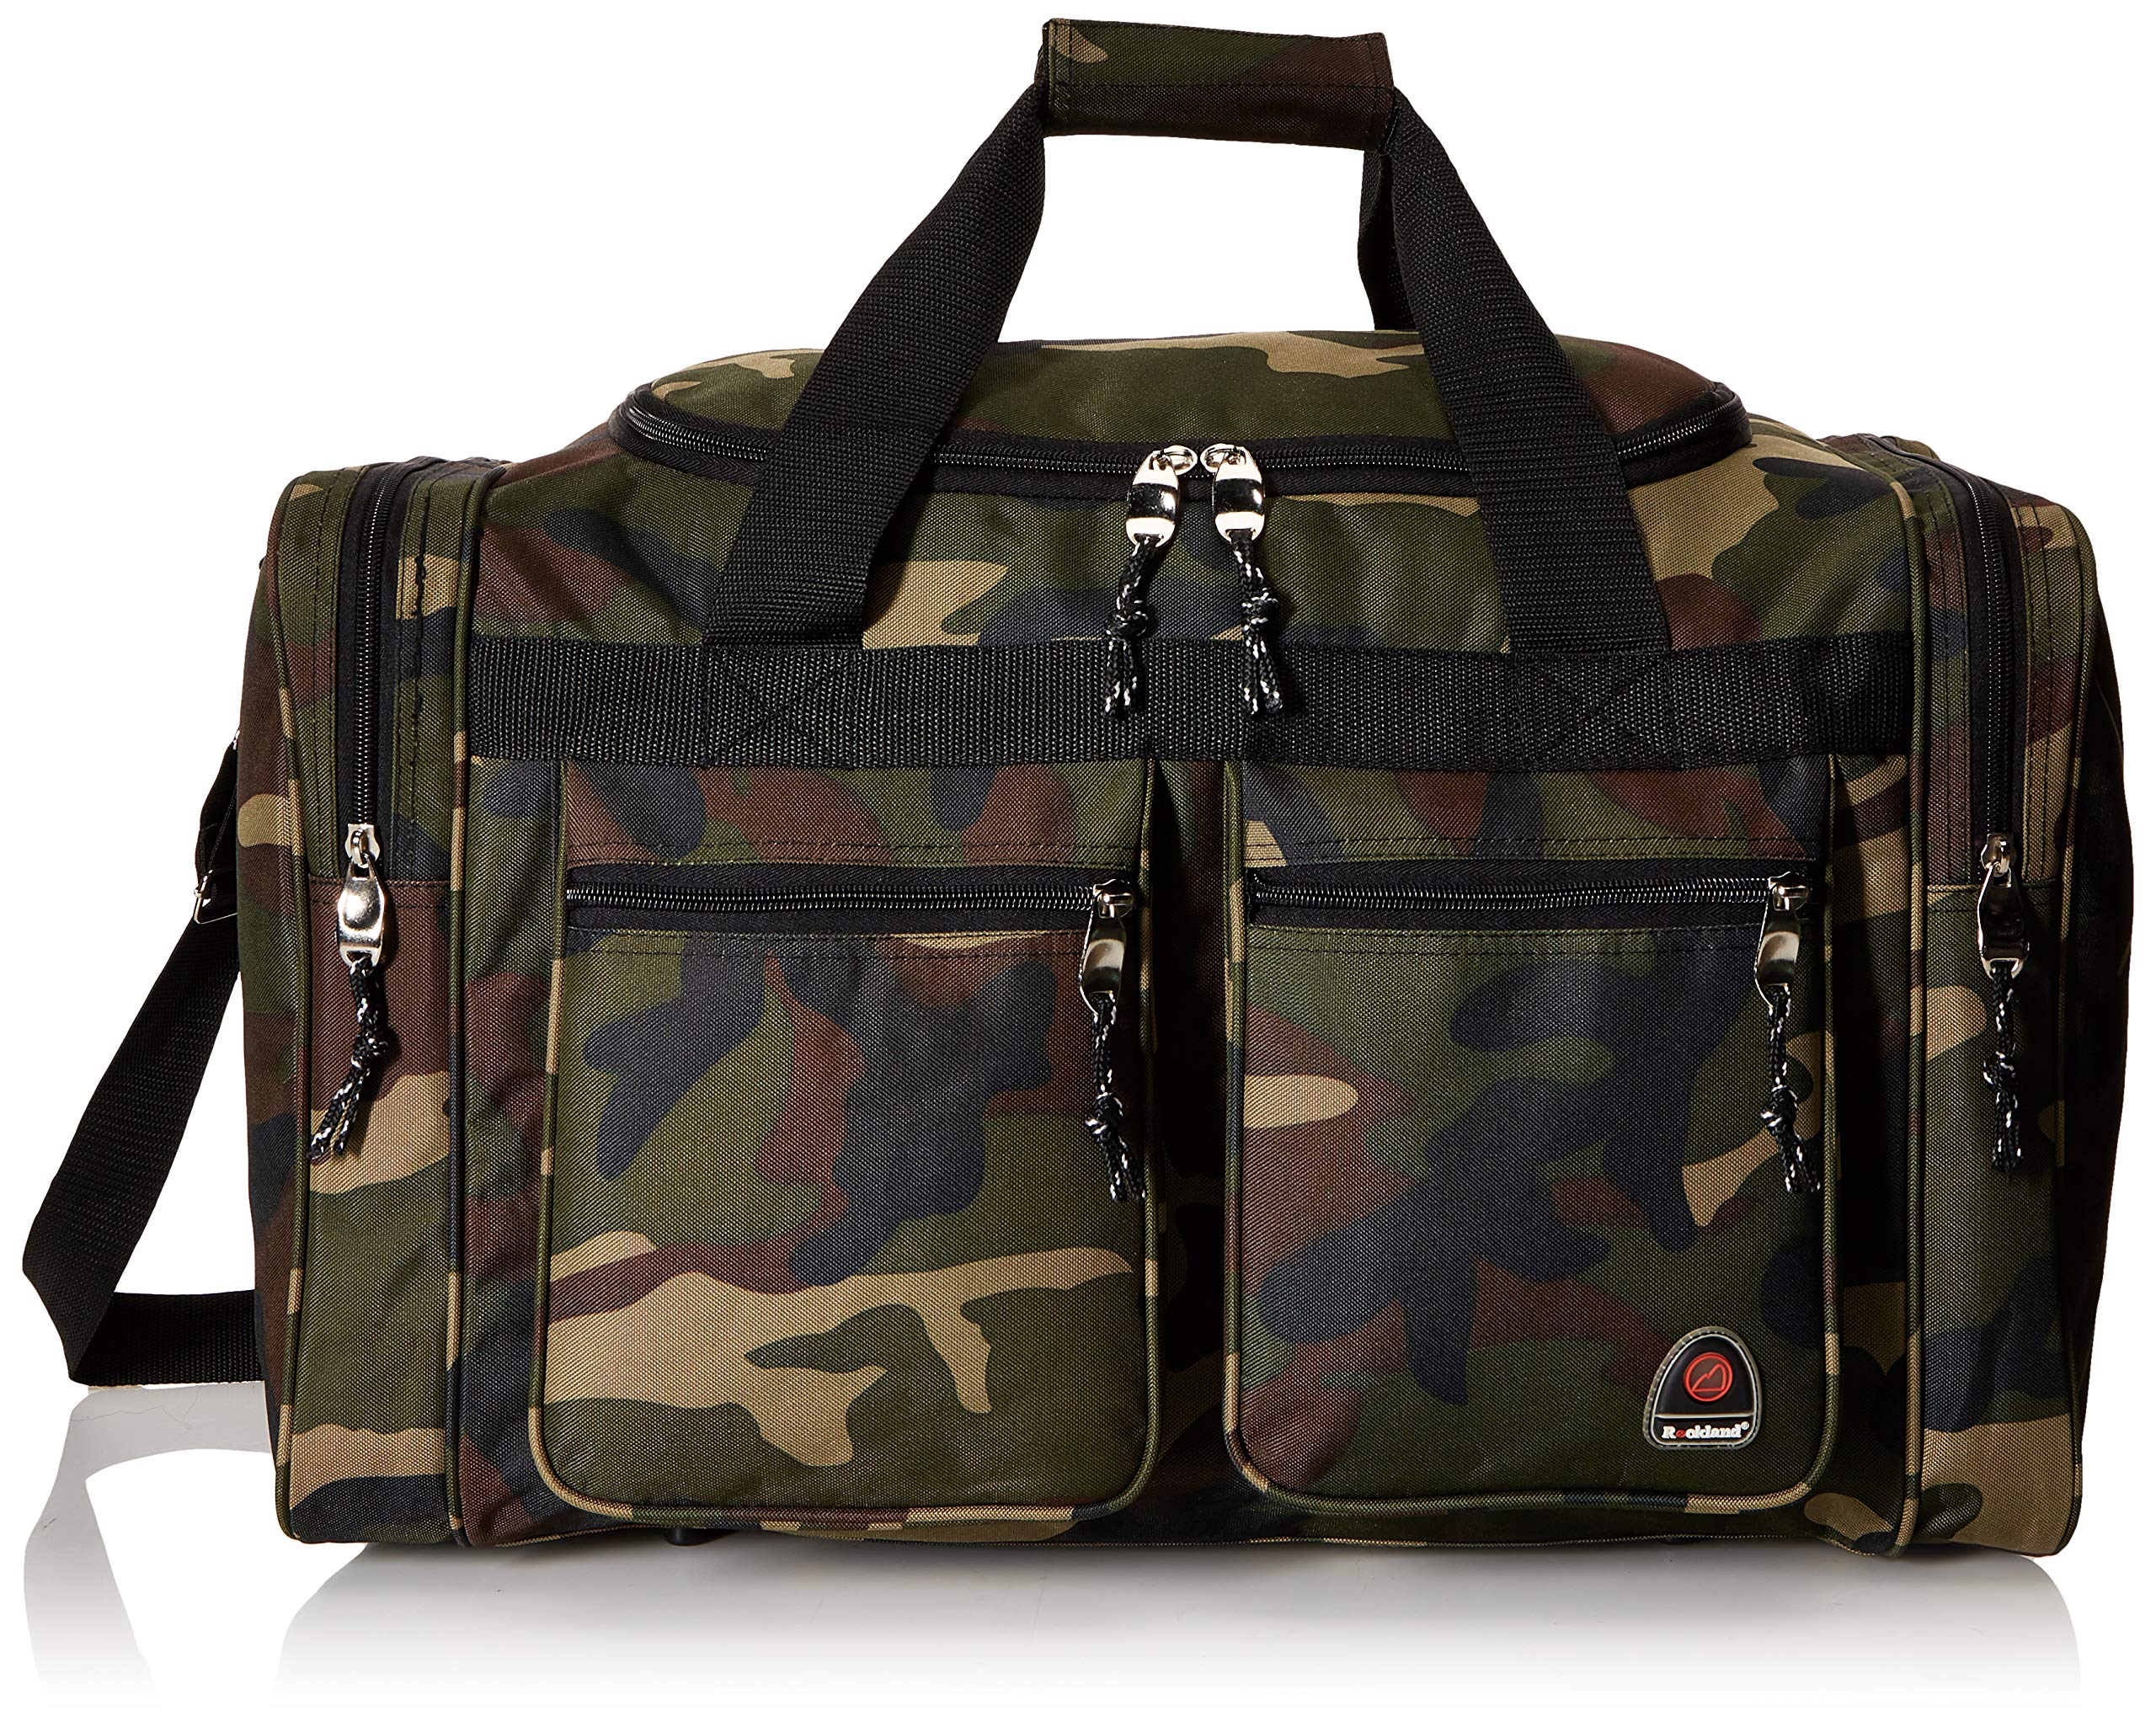 19" Rockland Duffel Bag (Camouflage) $13.50 + Free Shipping w/ Prime or on $35+